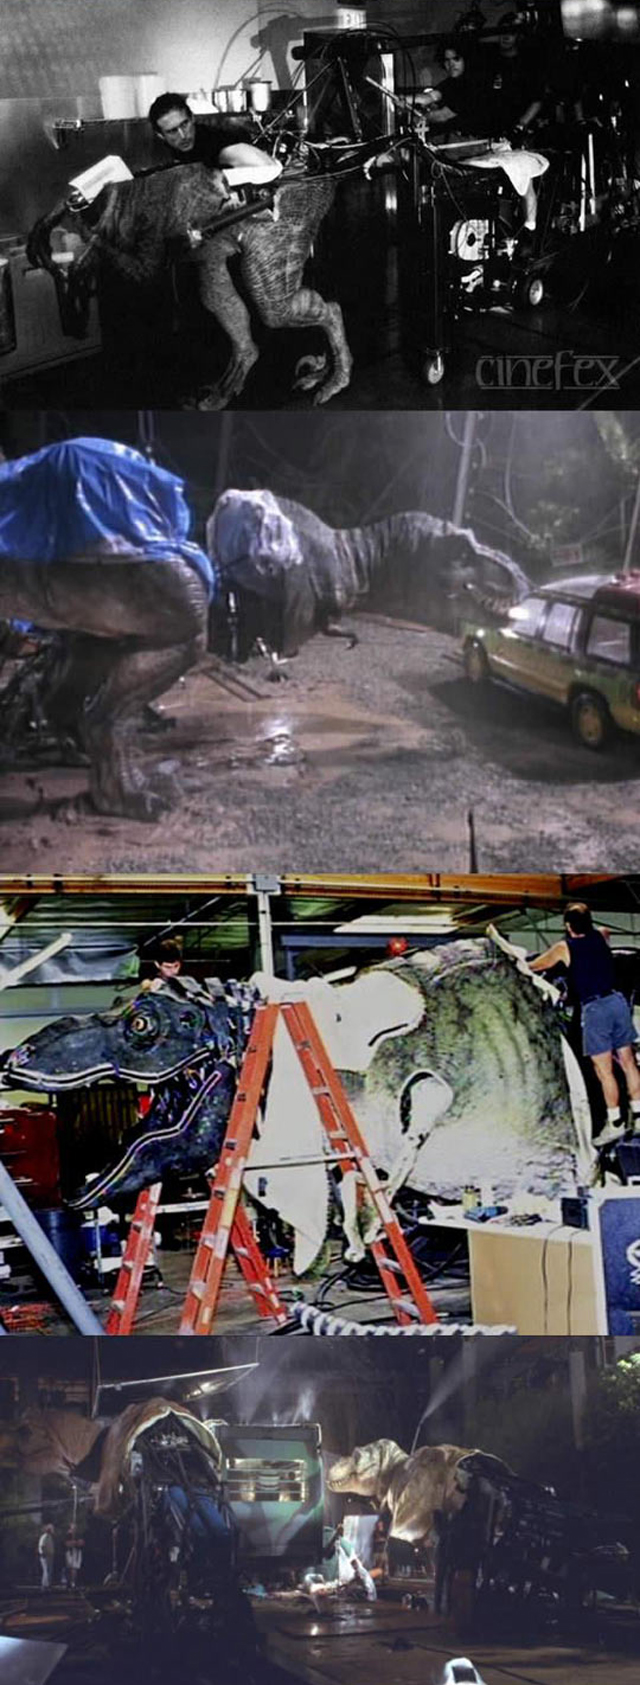 Jurassic Park Dinosaurs Behind These Scenes